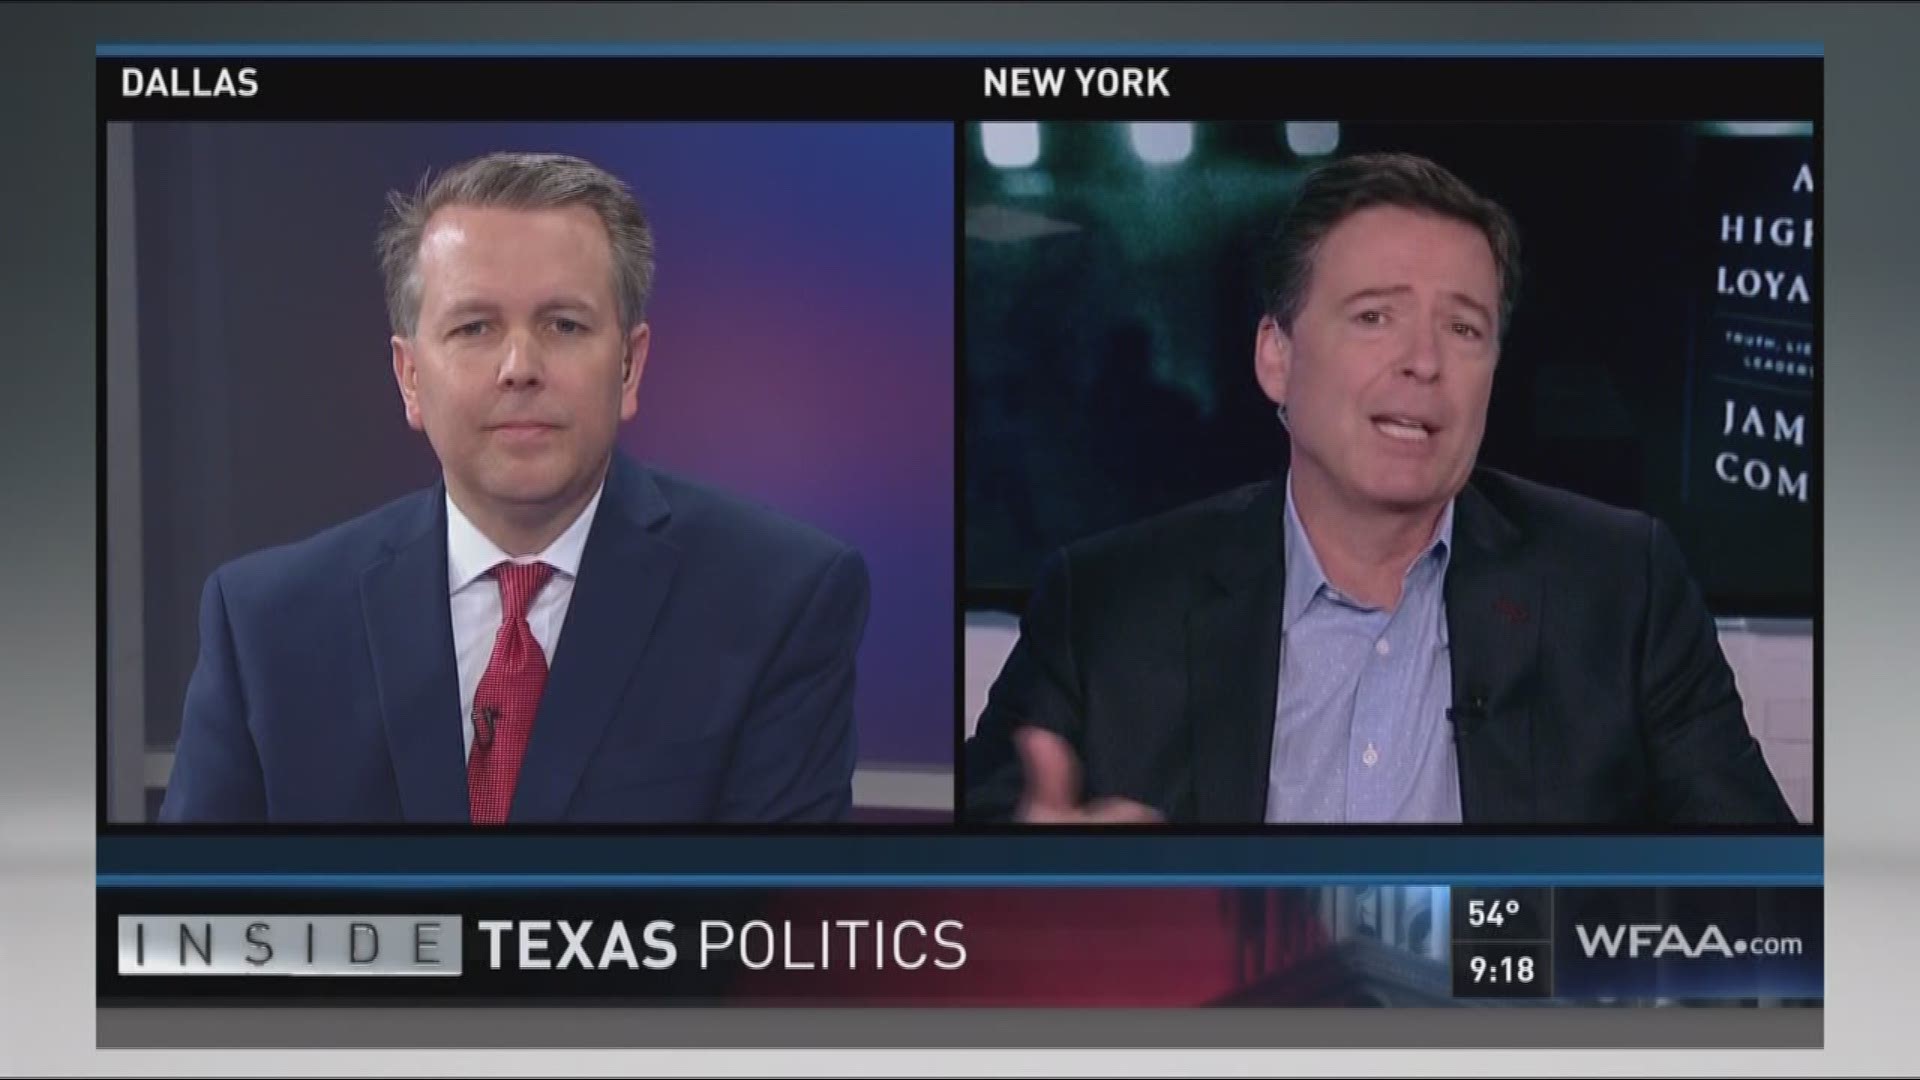 Host Jason Whitely had a one-on-one interview with former FBI Director James Comey. Whitely pressed Comey on the President Trump allegation he made without any evidence, the timing of Comey's book (A Higher Loyalty: Truth, Lies, and Leadership), and why t